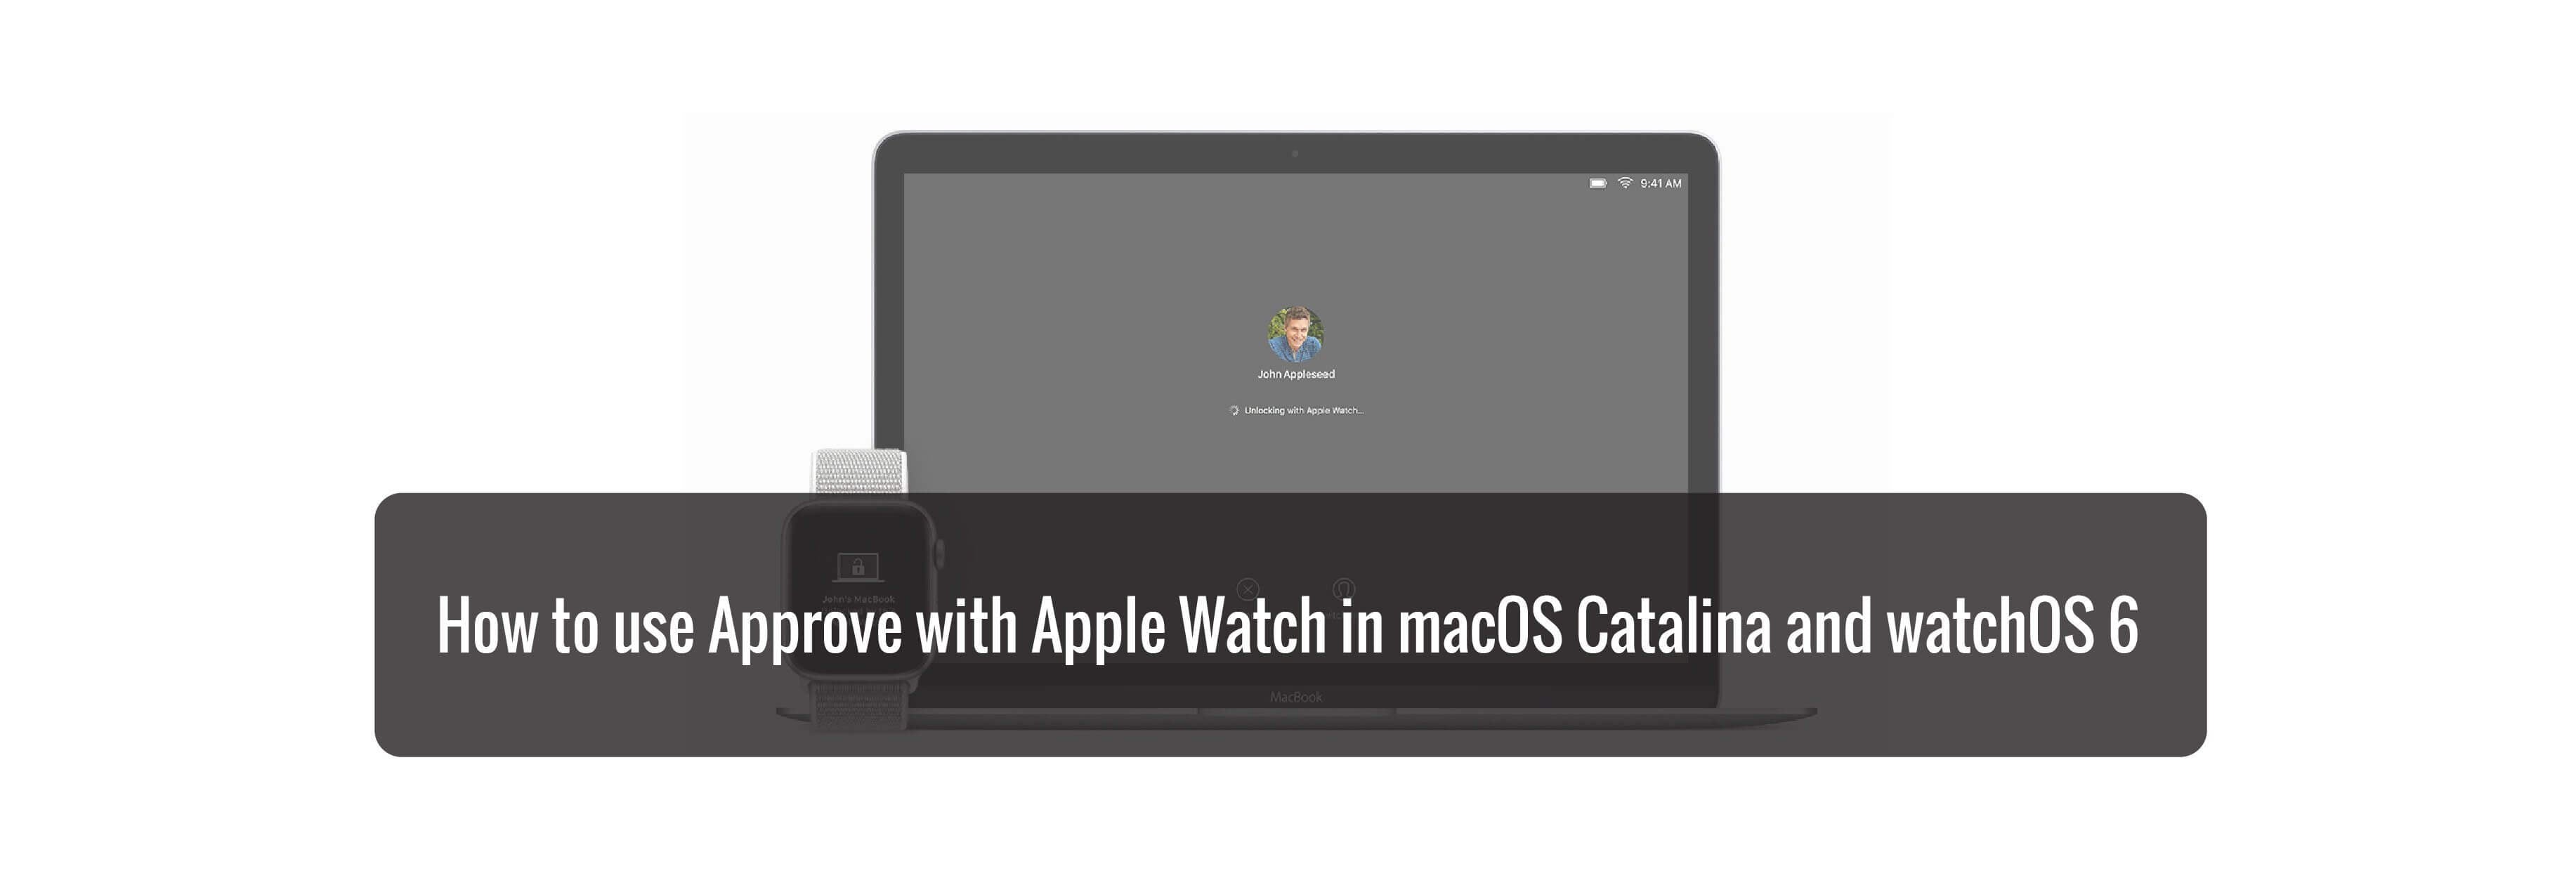 How to use Approve with Apple Watch in macOS Catalina and watchOS 6